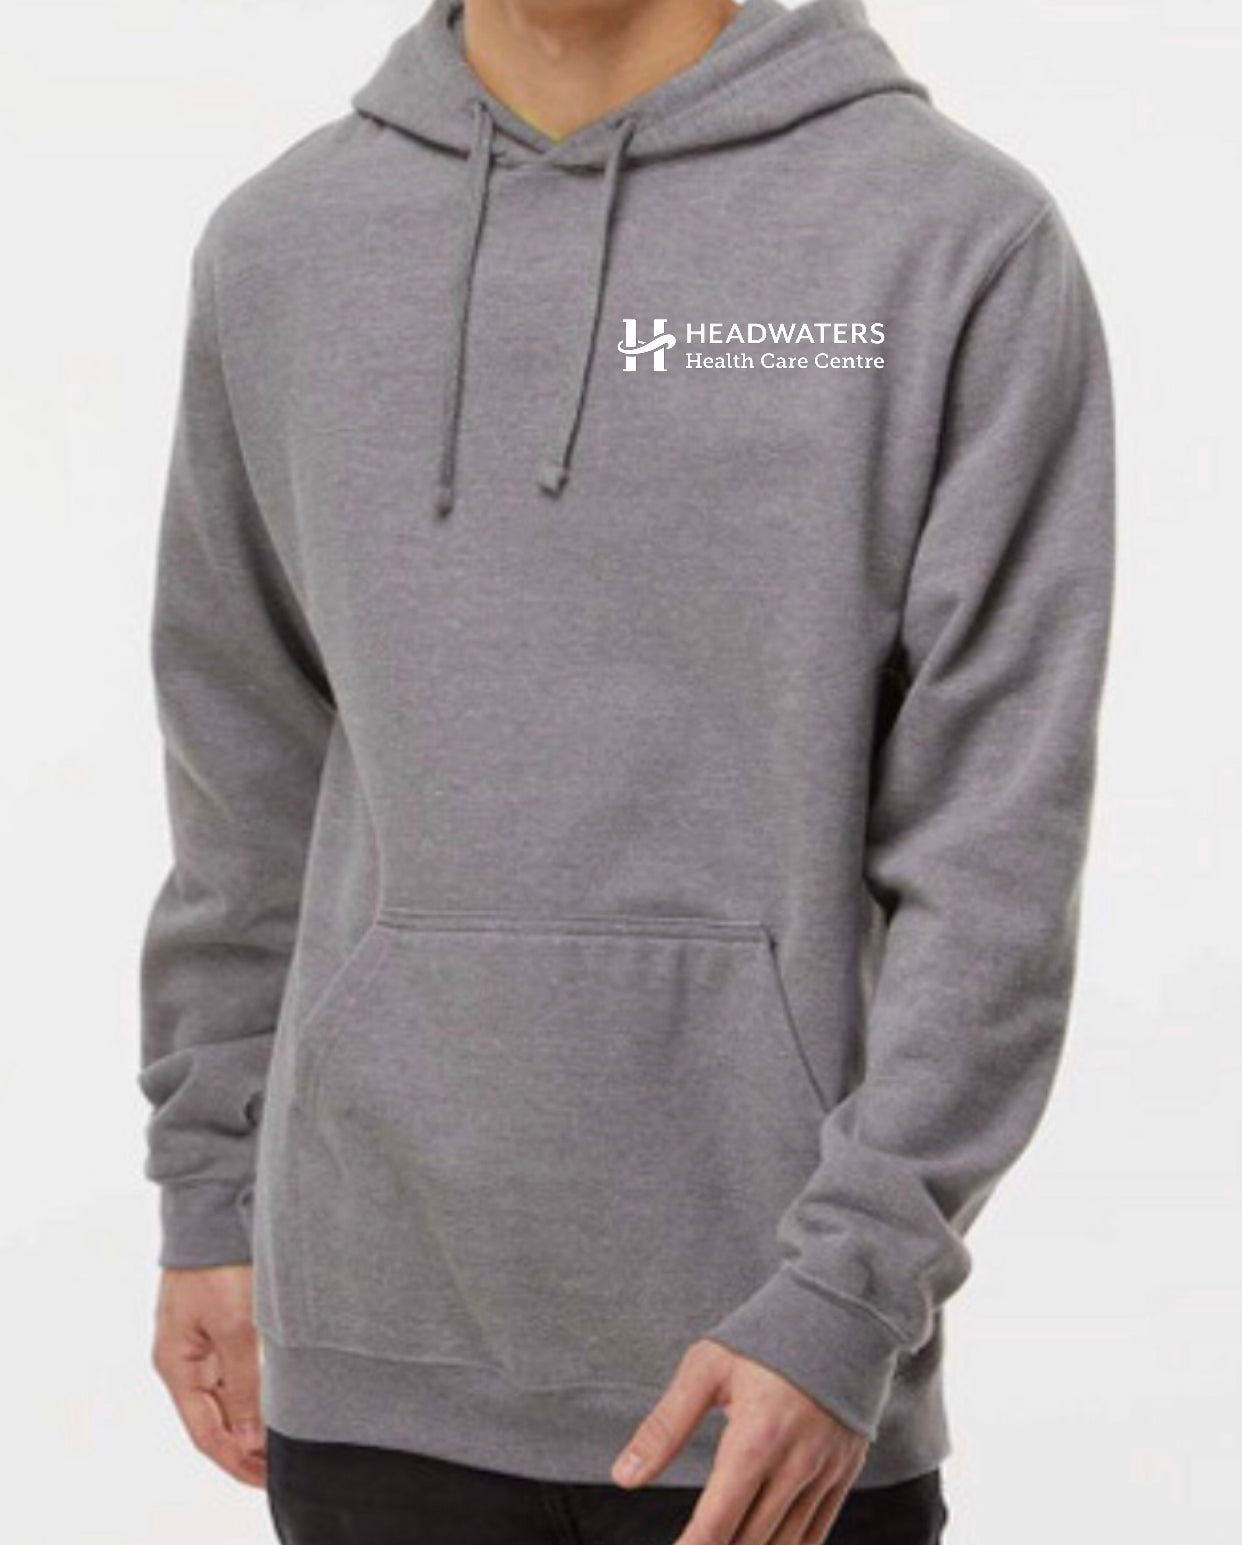 Hoodie, Adult Deluxe super soft (Unisex sizes) High quality